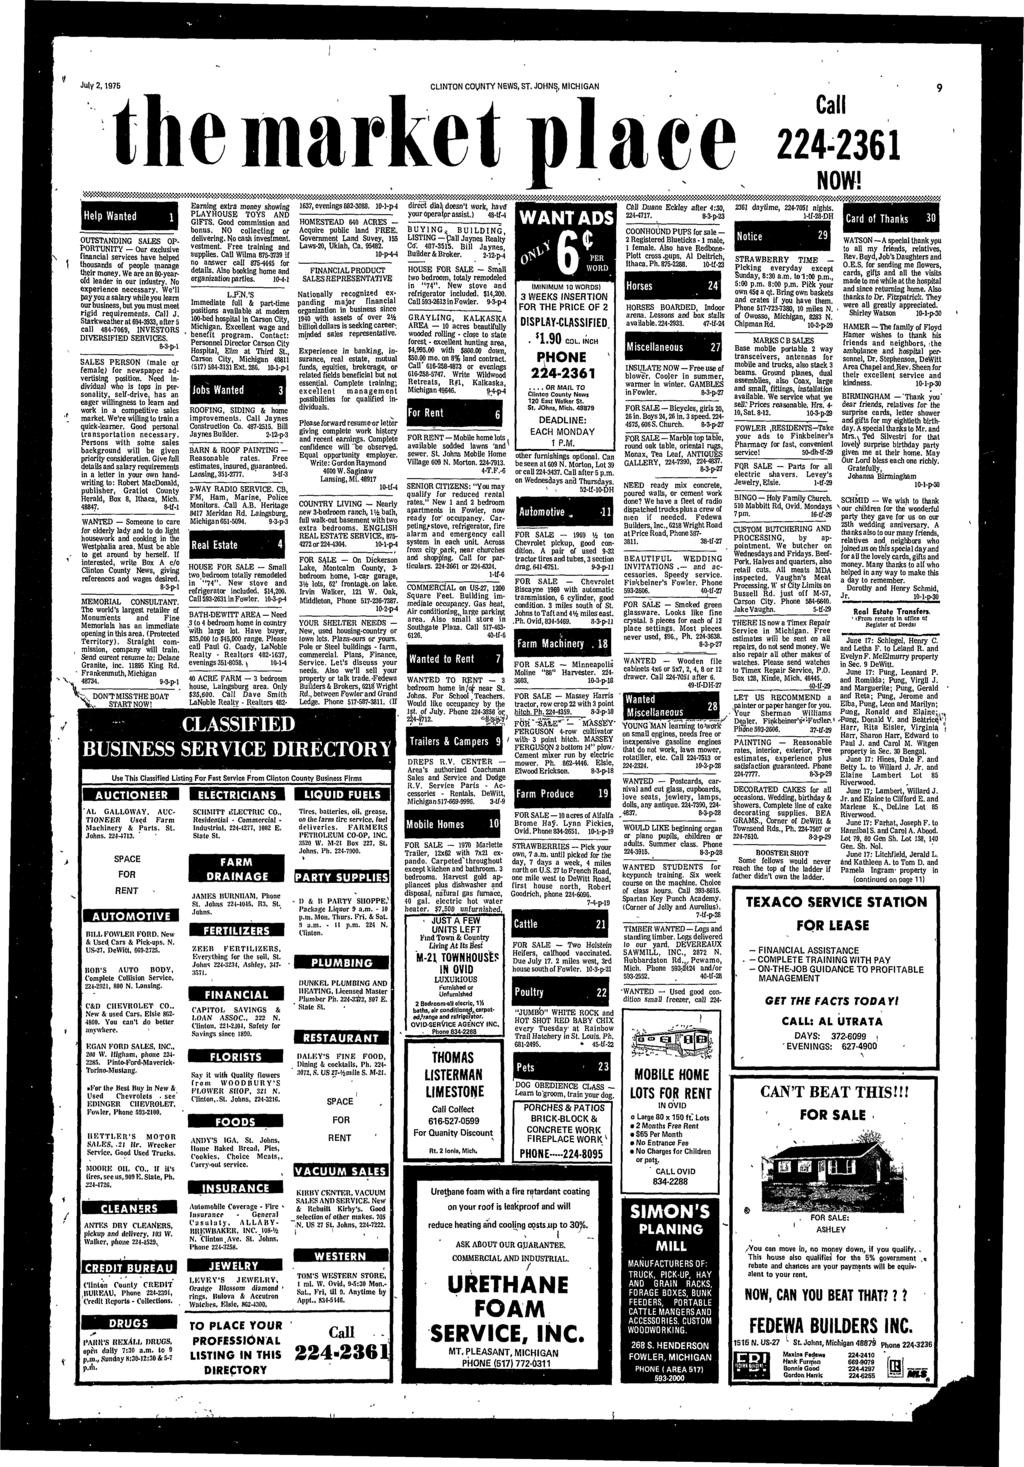 July 2,975 CLINTON COUNTY NEWS, ST. JOHNS, MICHIGAN the market place Call 224-236 NOW! / V.